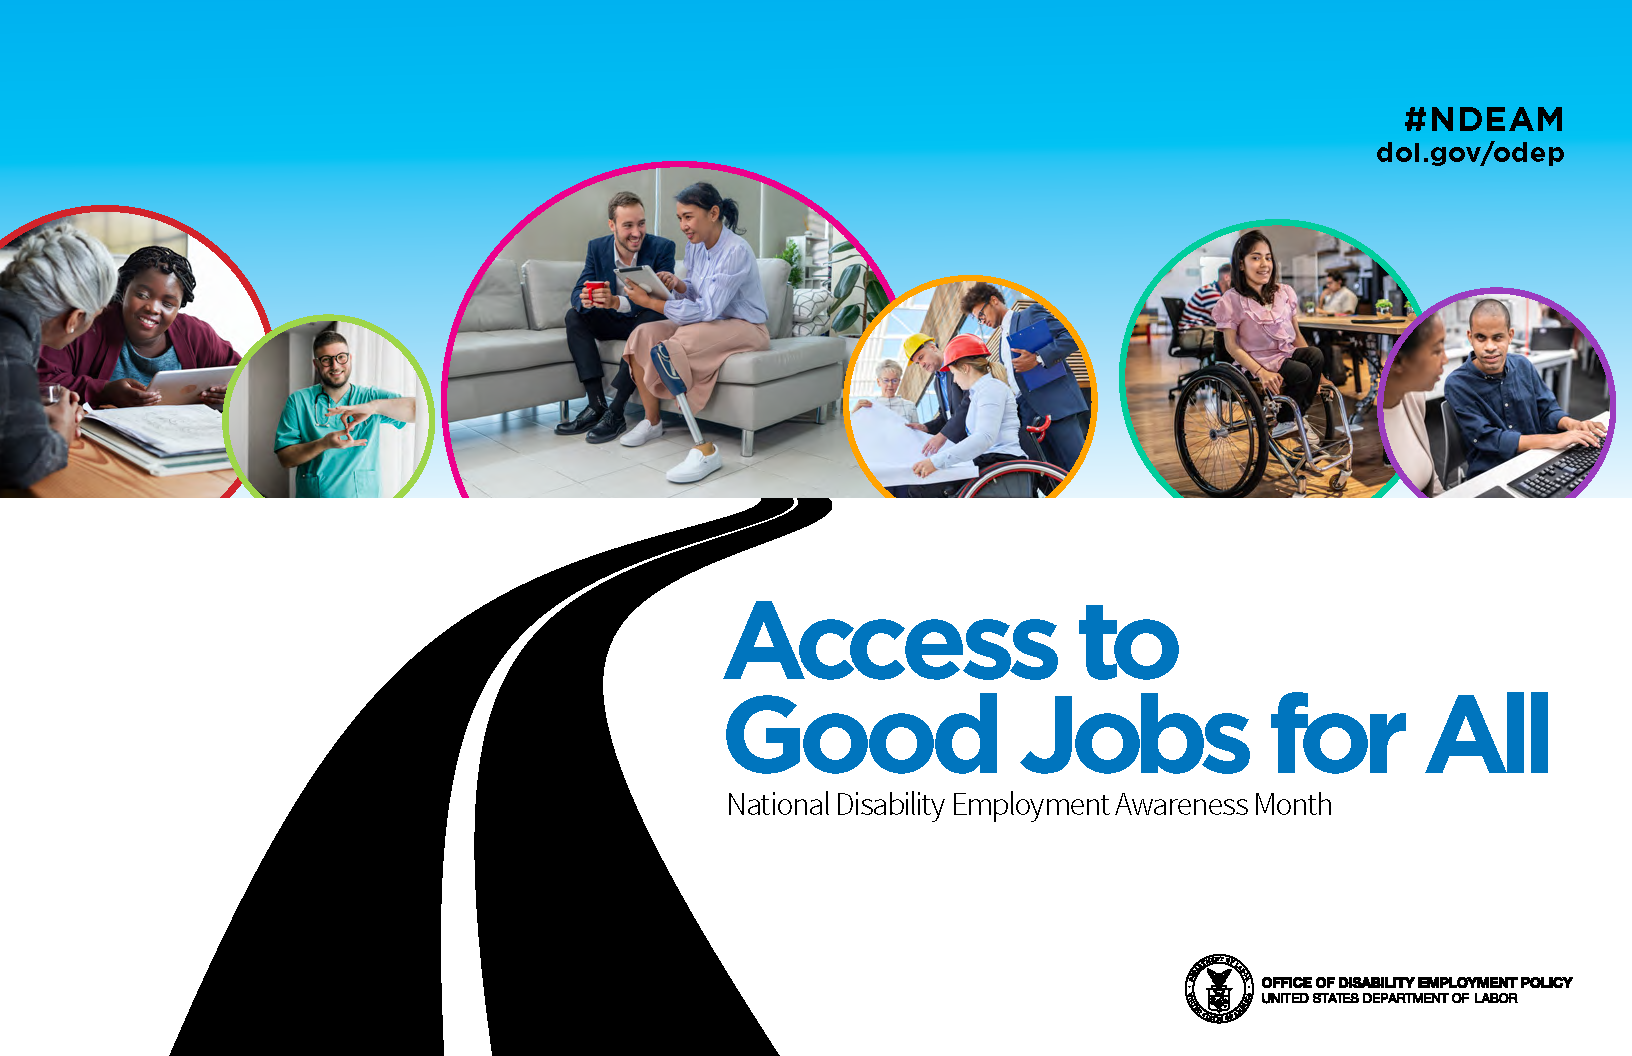 The poster is rectangular in shape and features a collage of six photos of diverse people with a range of disabilities working in various inclusive workplaces. These photos appear in colored circles against a blue-sky background. Underneath the photos on a white background is a graphic image of a black, winding road leading up to them. To the side of the road, the words “Access to Good Jobs for All” and “National Disability Employment Awareness Month” appear. In the upper right corner, “#NDEAM” and “dol.gov/odep” are displayed. In the lower right corner is the DOL seal with the words “Office of Disability Employment Policy, United States Department of Labor” next to it.